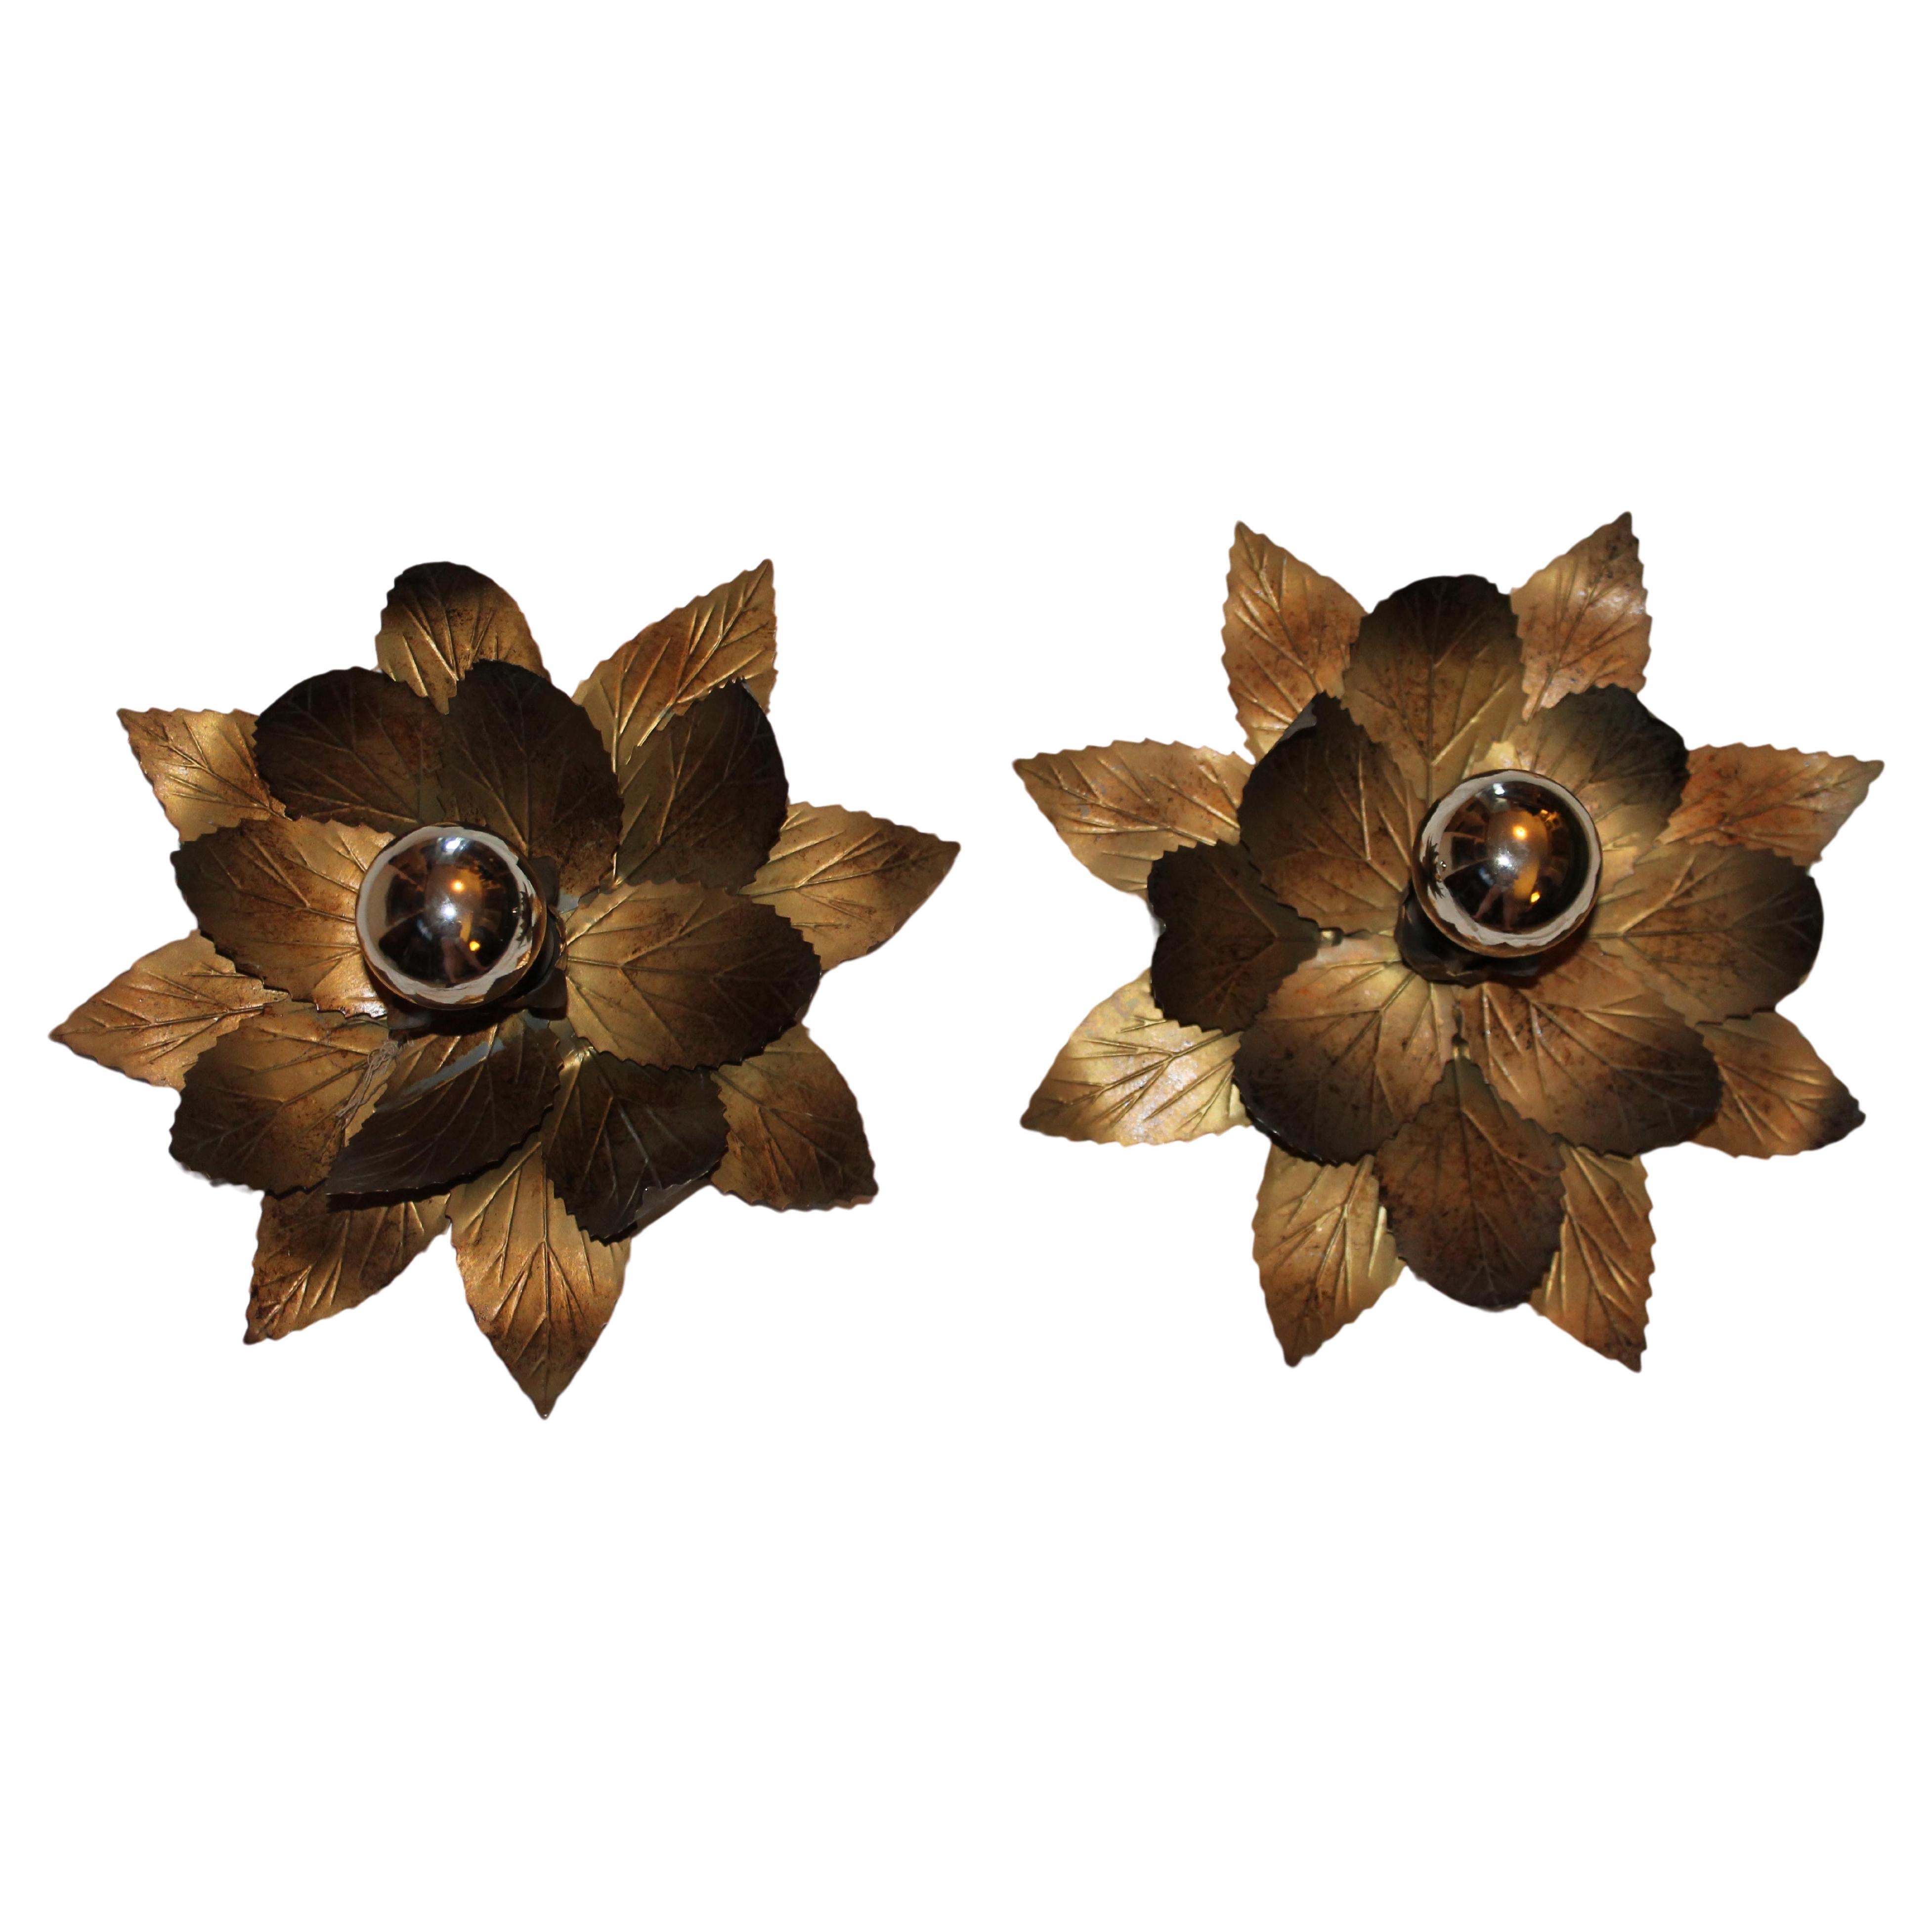 Pair Italian Mid Century Modern Brutalist Flower Form Gilt Metal Flower in Bloom Wall Sconces. Very beautiful sconces in very good condition.